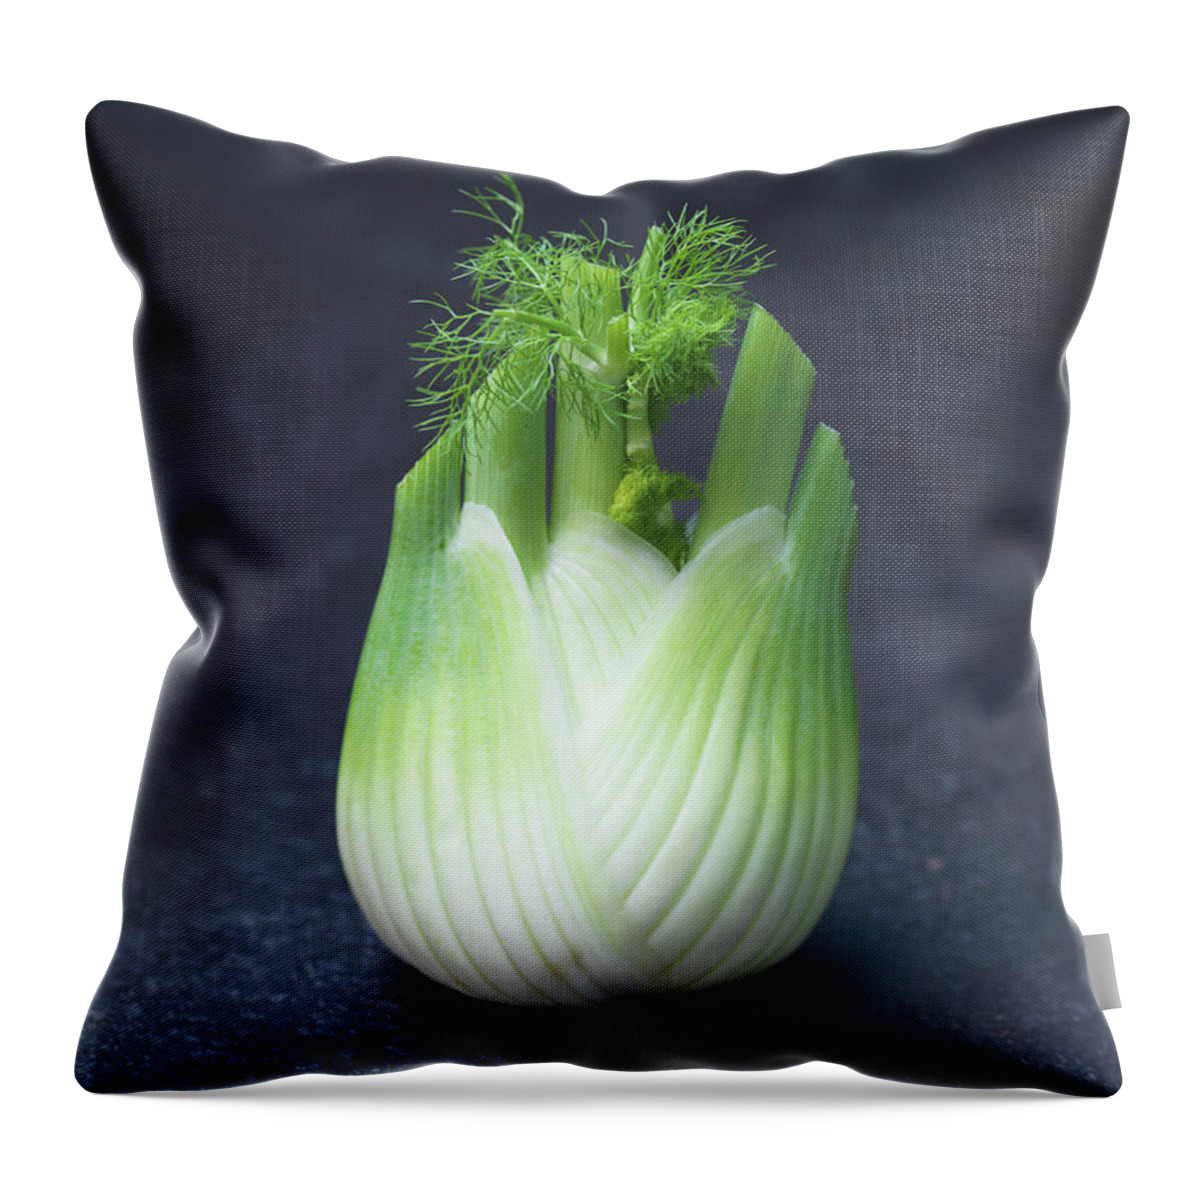 Fennel Throw Pillow featuring the photograph Close Up Of Fennel Head by Diana Miller